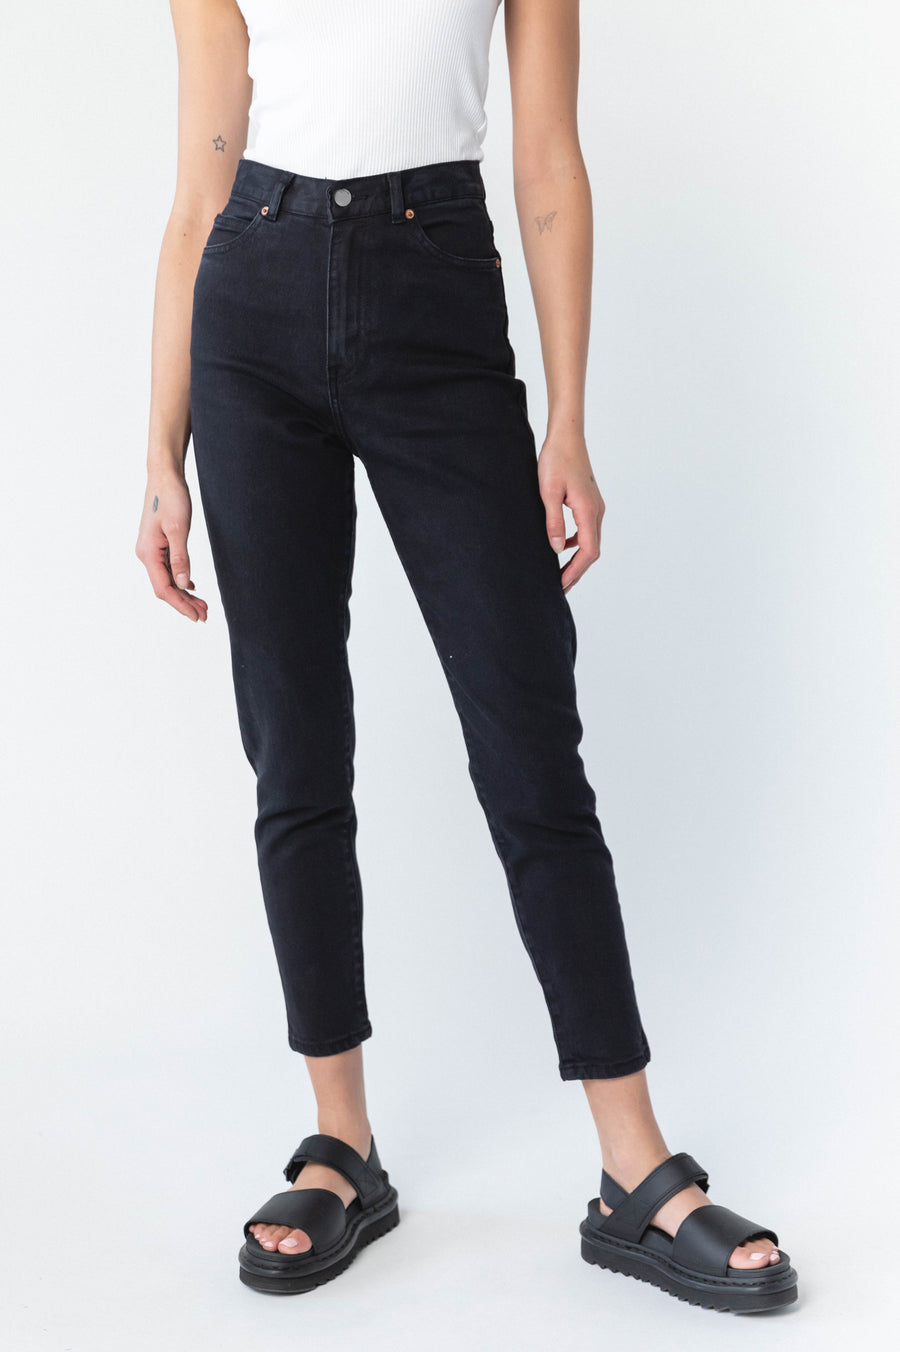 Nora Jeans - Washed Black Stretch